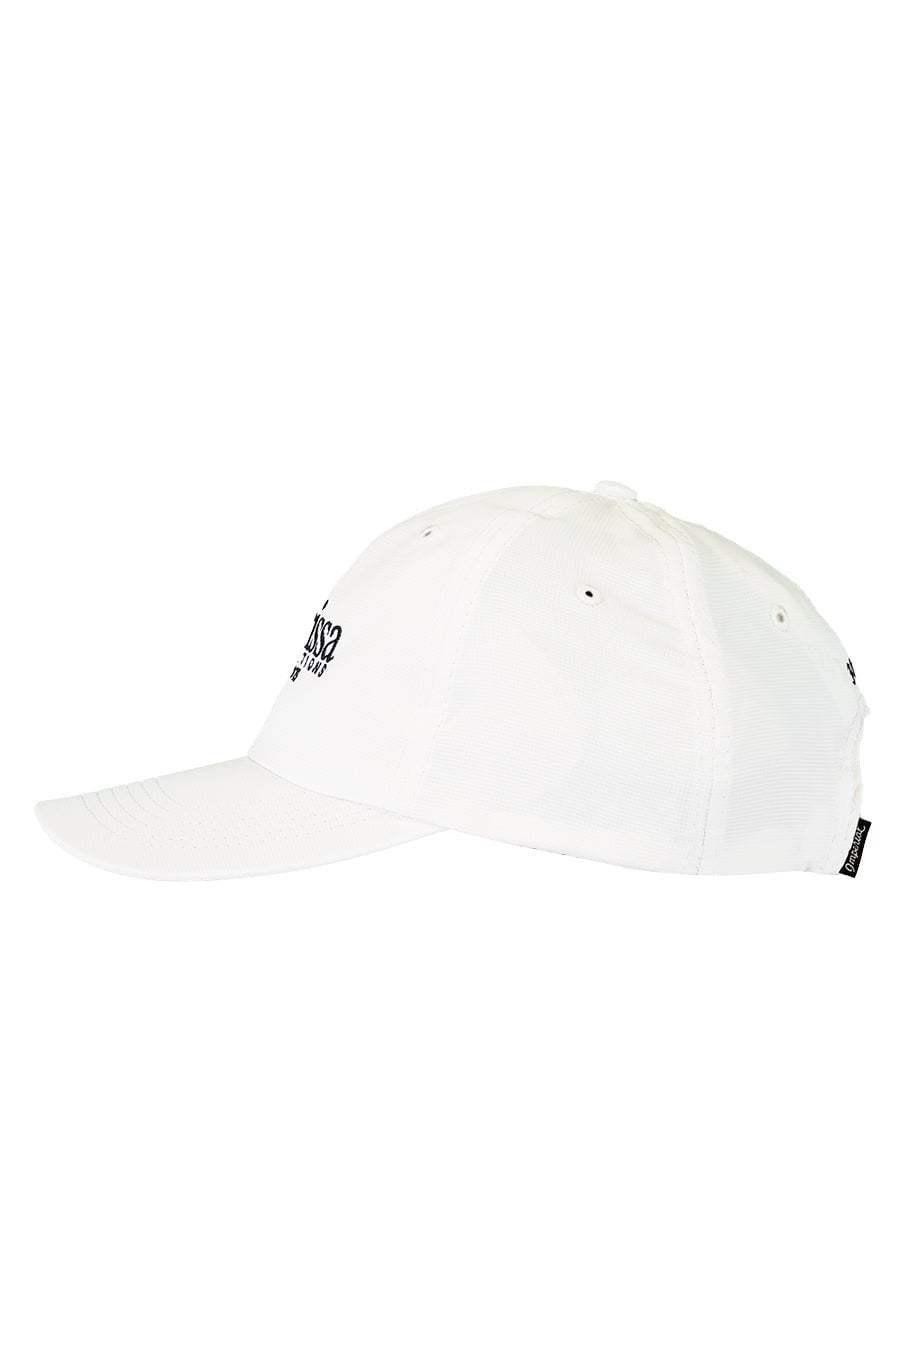 MARISSA COLLECTIONS-White Hat-WHITE